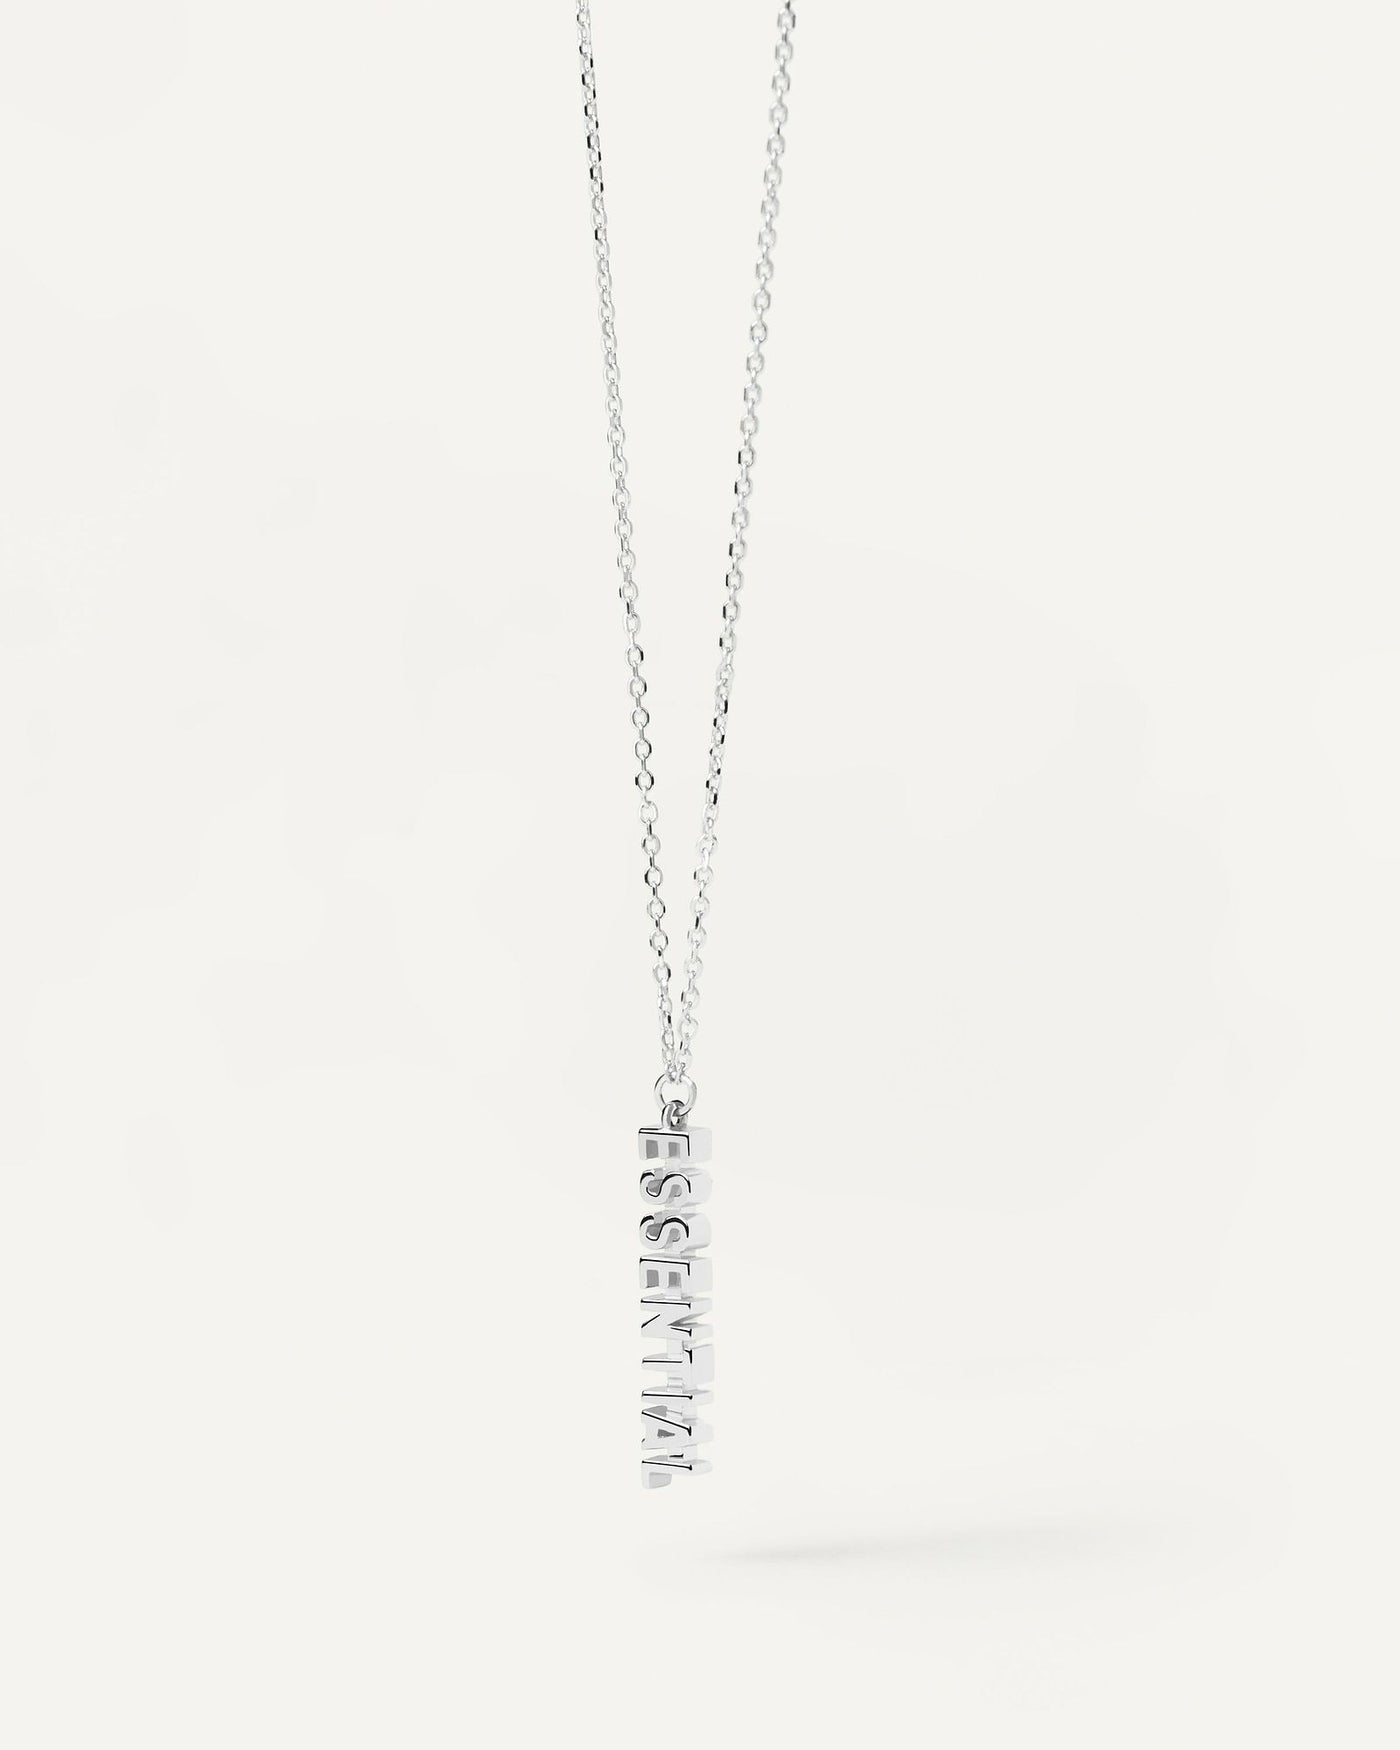 2024 Selection | Essential Silver Necklace. Sterling silver necklace with a word pendant: Essential. Get the latest arrival from PDPAOLA. Place your order safely and get this Best Seller. Free Shipping.